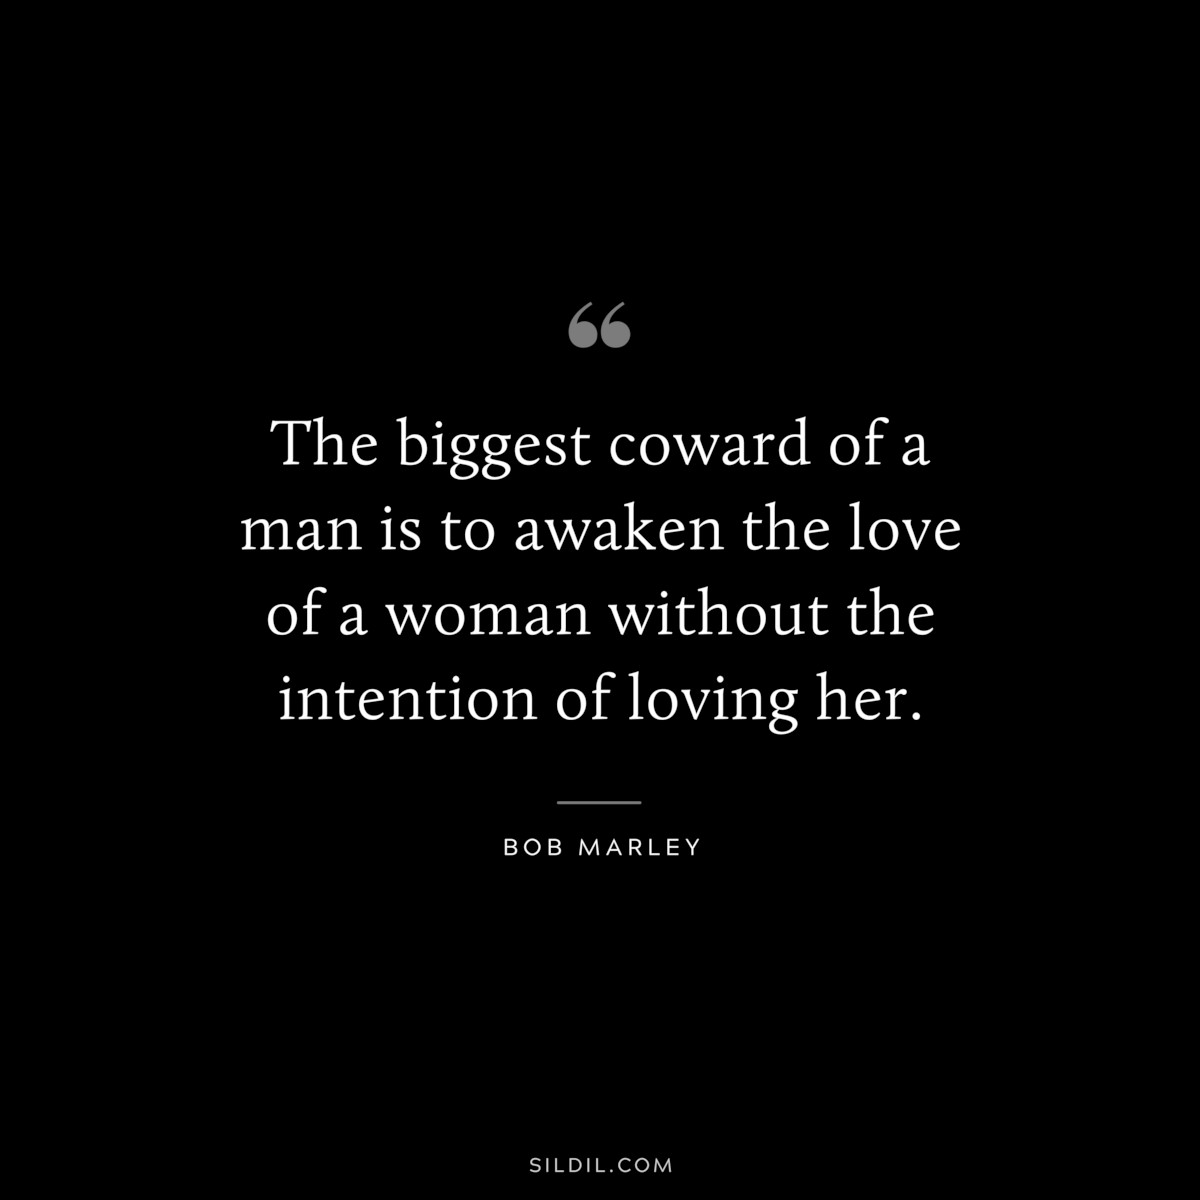 The biggest coward of a man is to awaken the love of a woman without the intention of loving her. ― Bob Marley